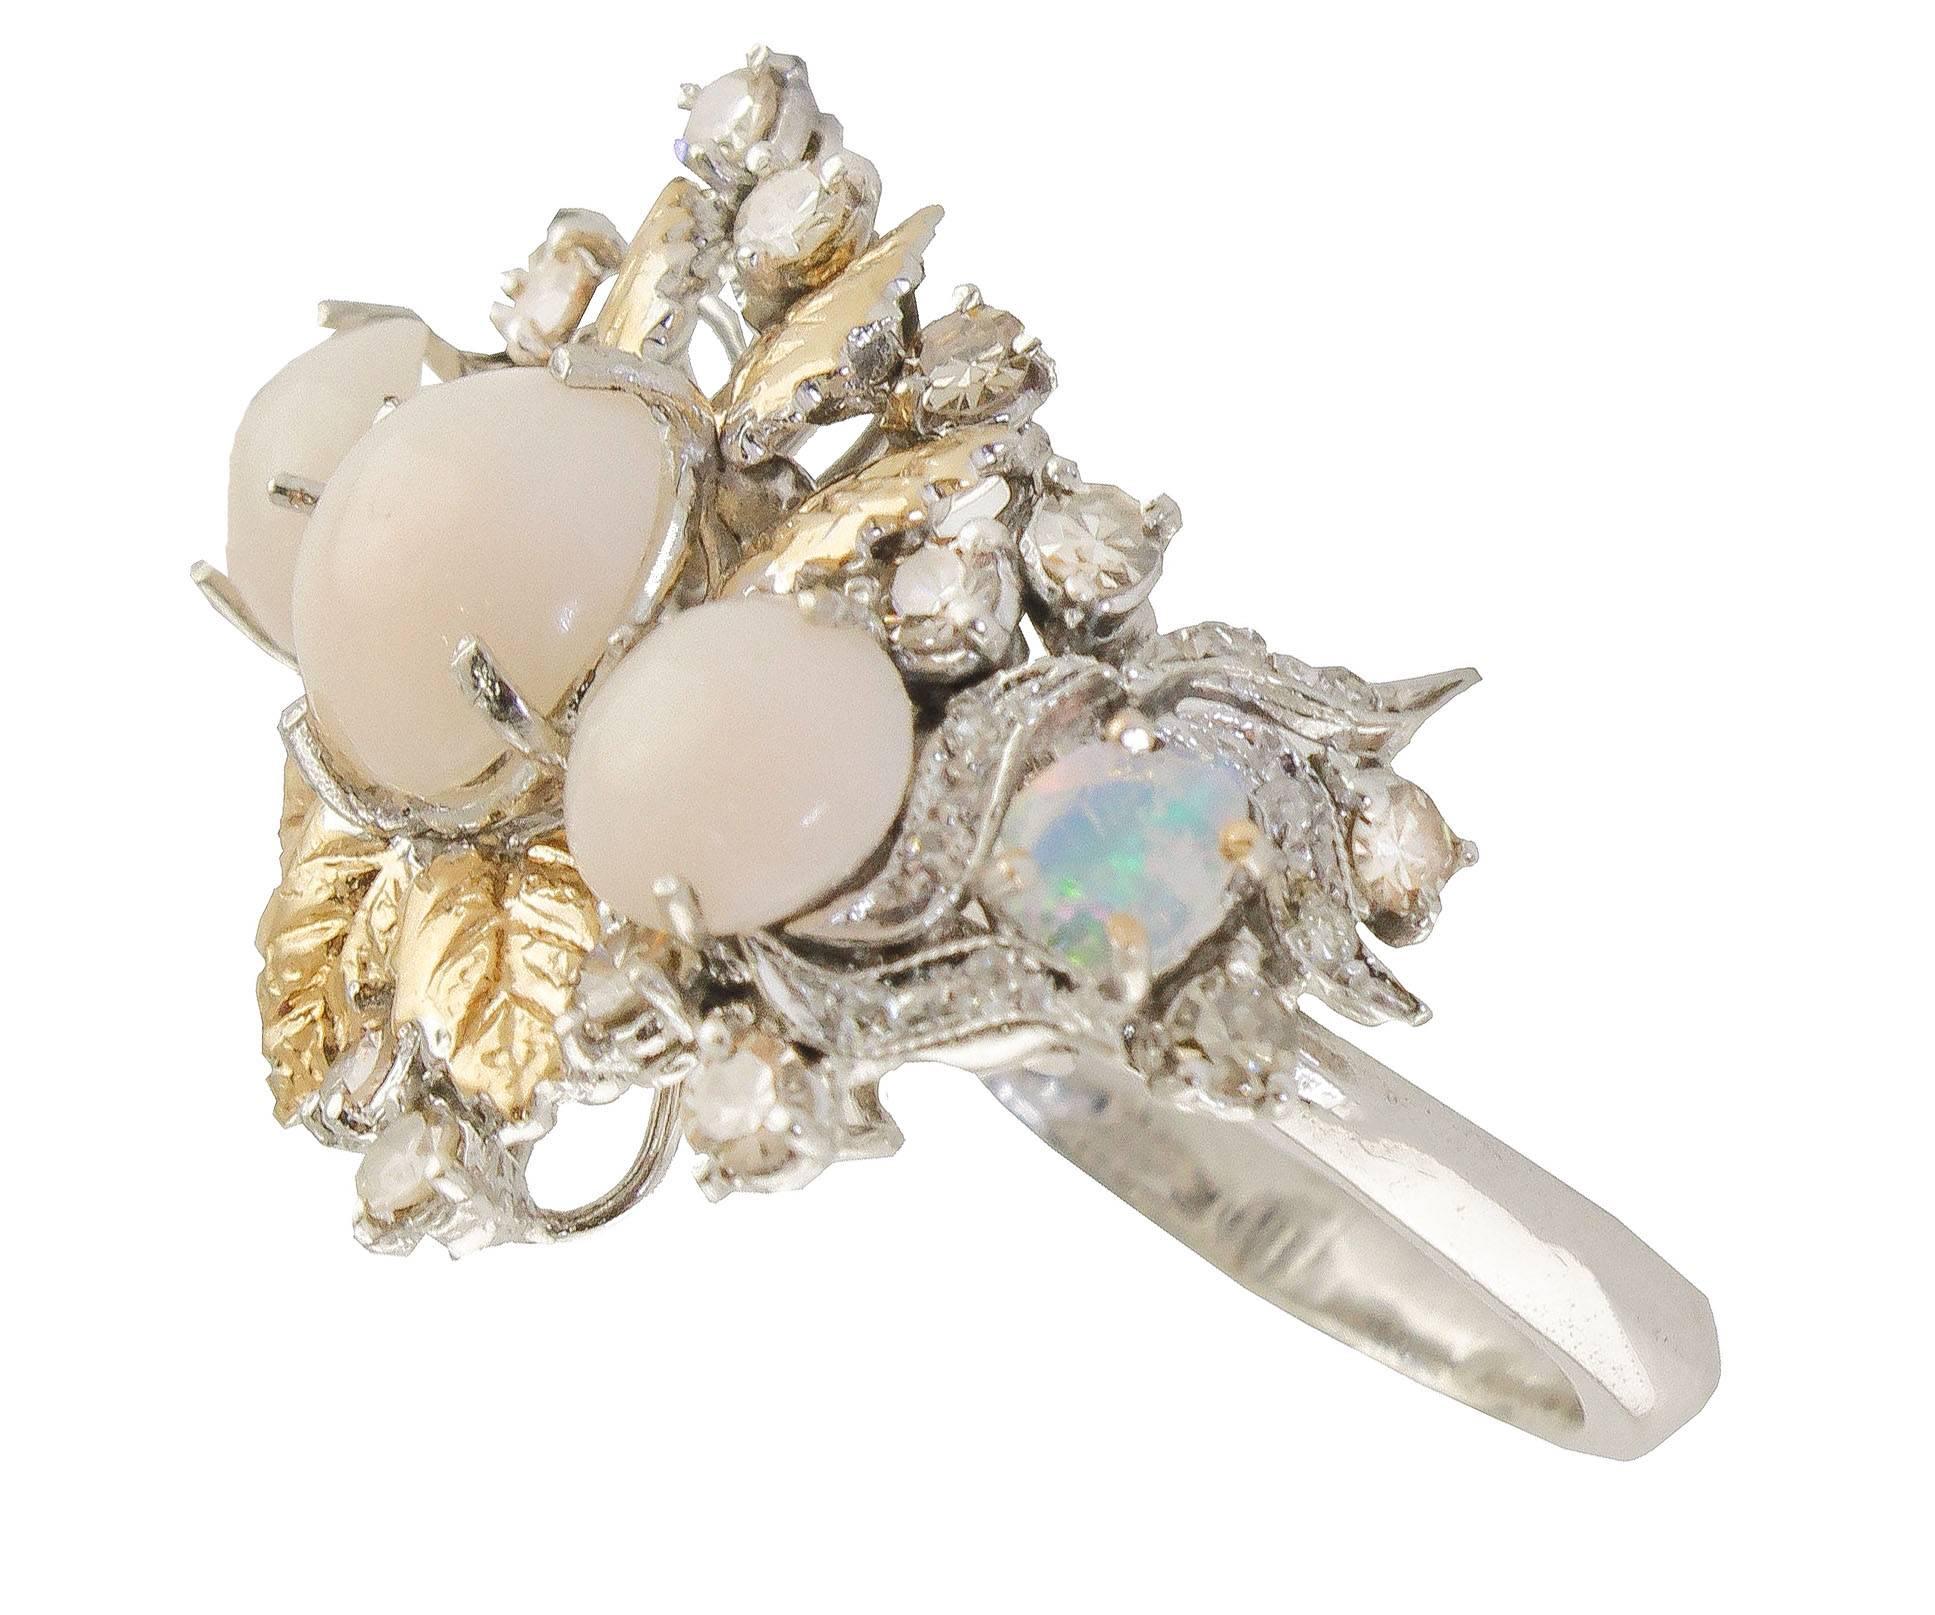 Mixed Cut Opal Diamonds Corals White and Rose Gold Flower Ring